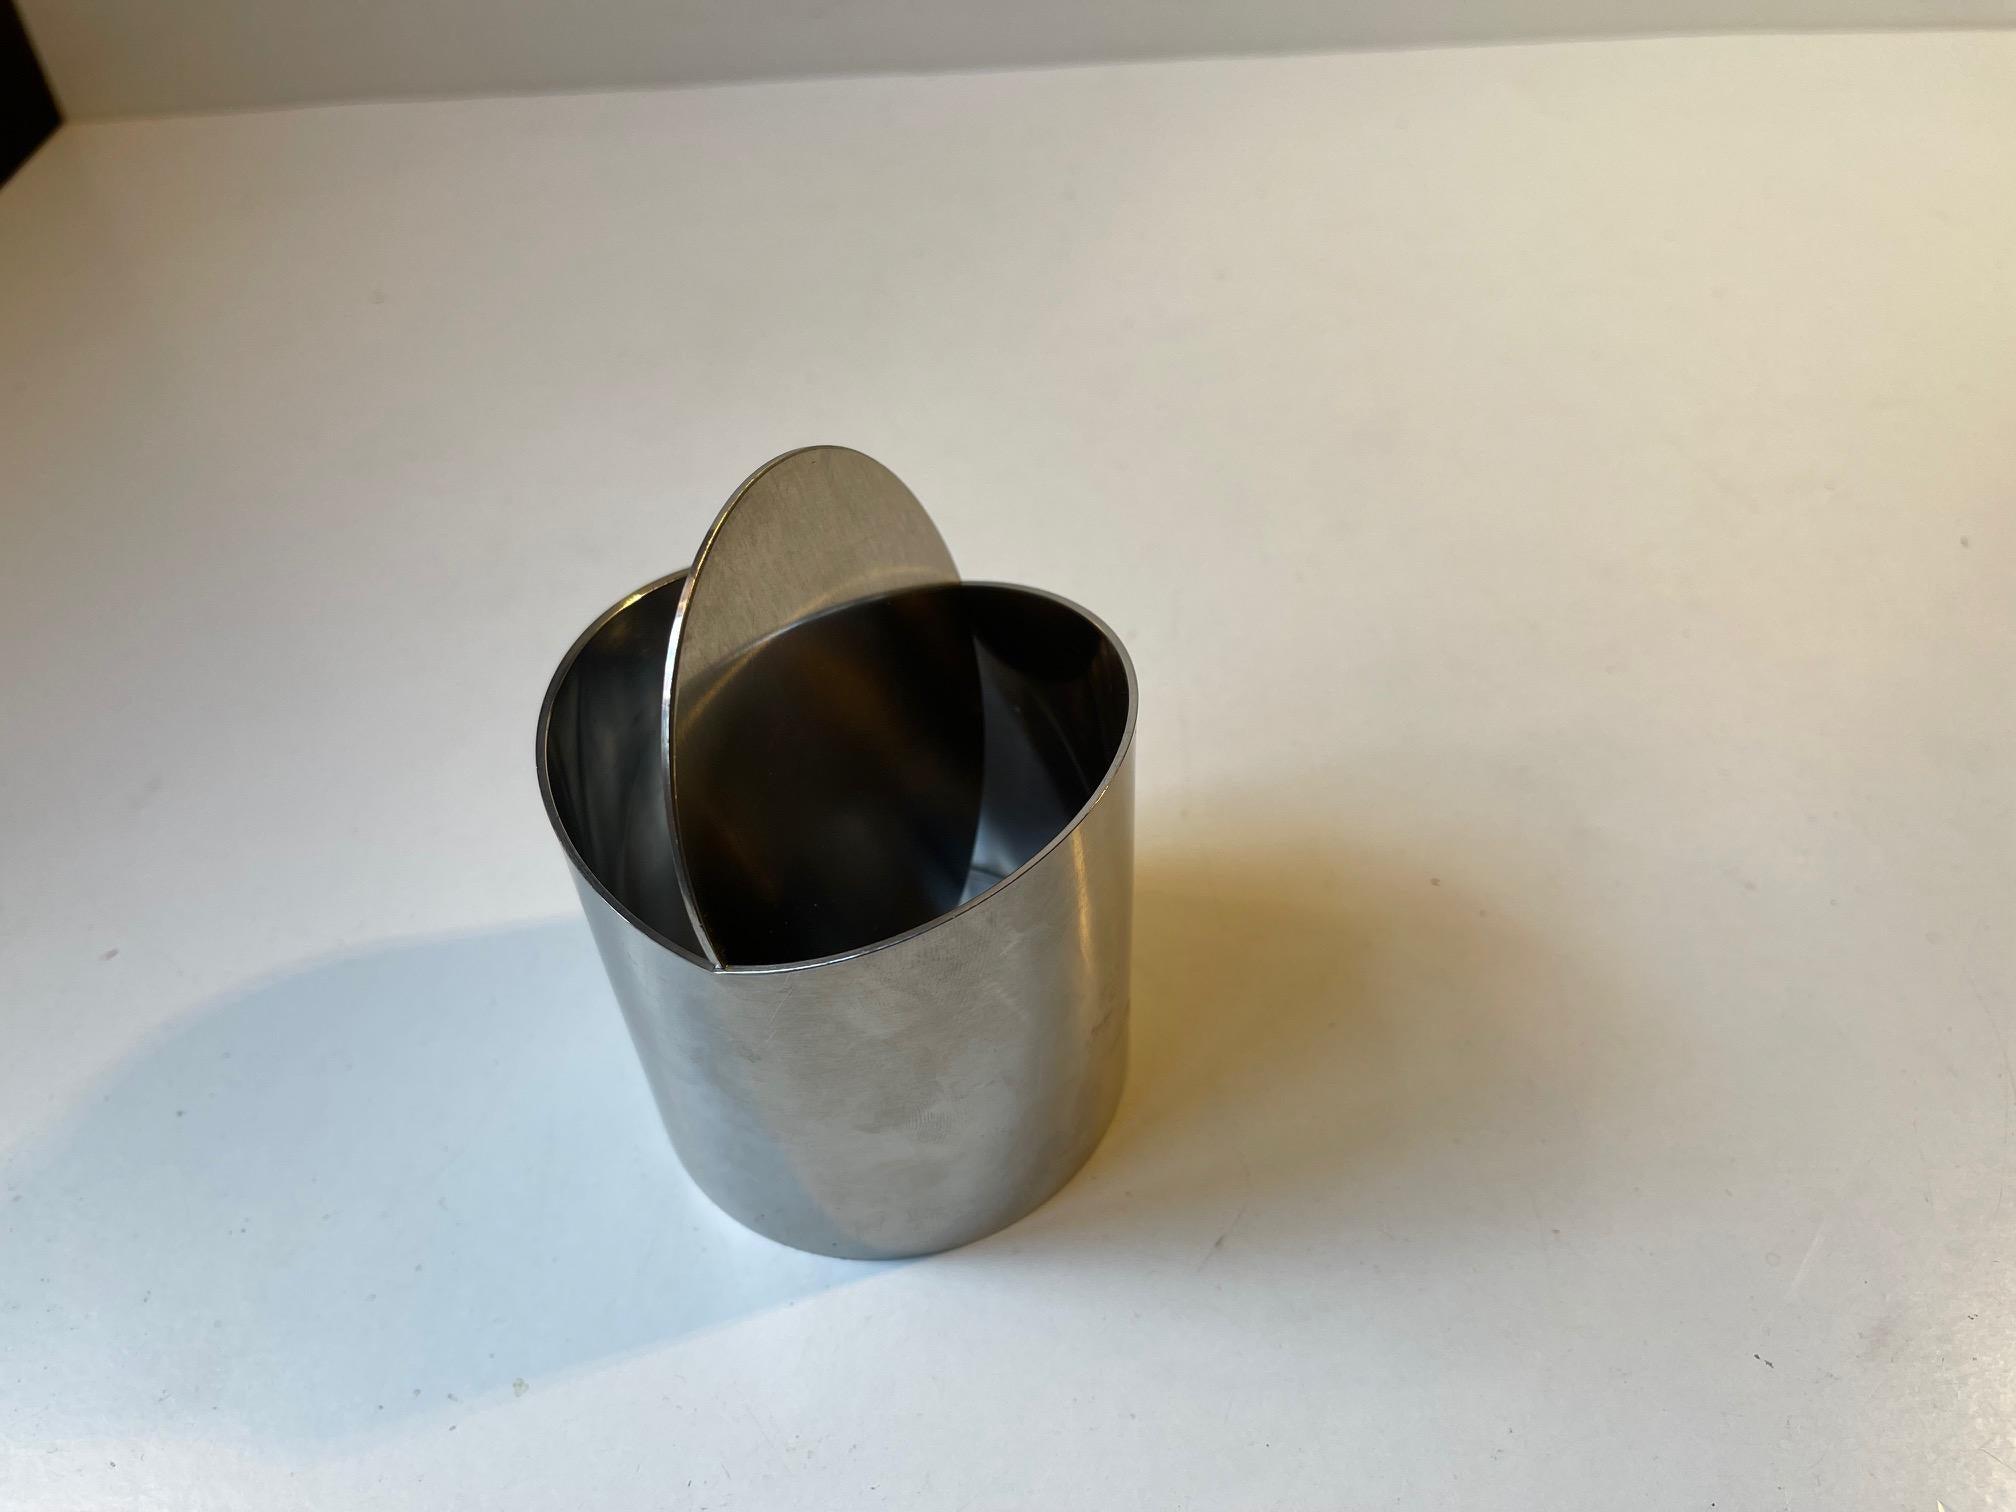 A stylish stainless steel ashtray designed by Roelandt and manufactured by Stelton in Denmark during the 1980s. Similar to Arne Jacobsen's cylinda-line but with a tilting mechanism/lid instead. Imprinted with designer and makers marks beneath the